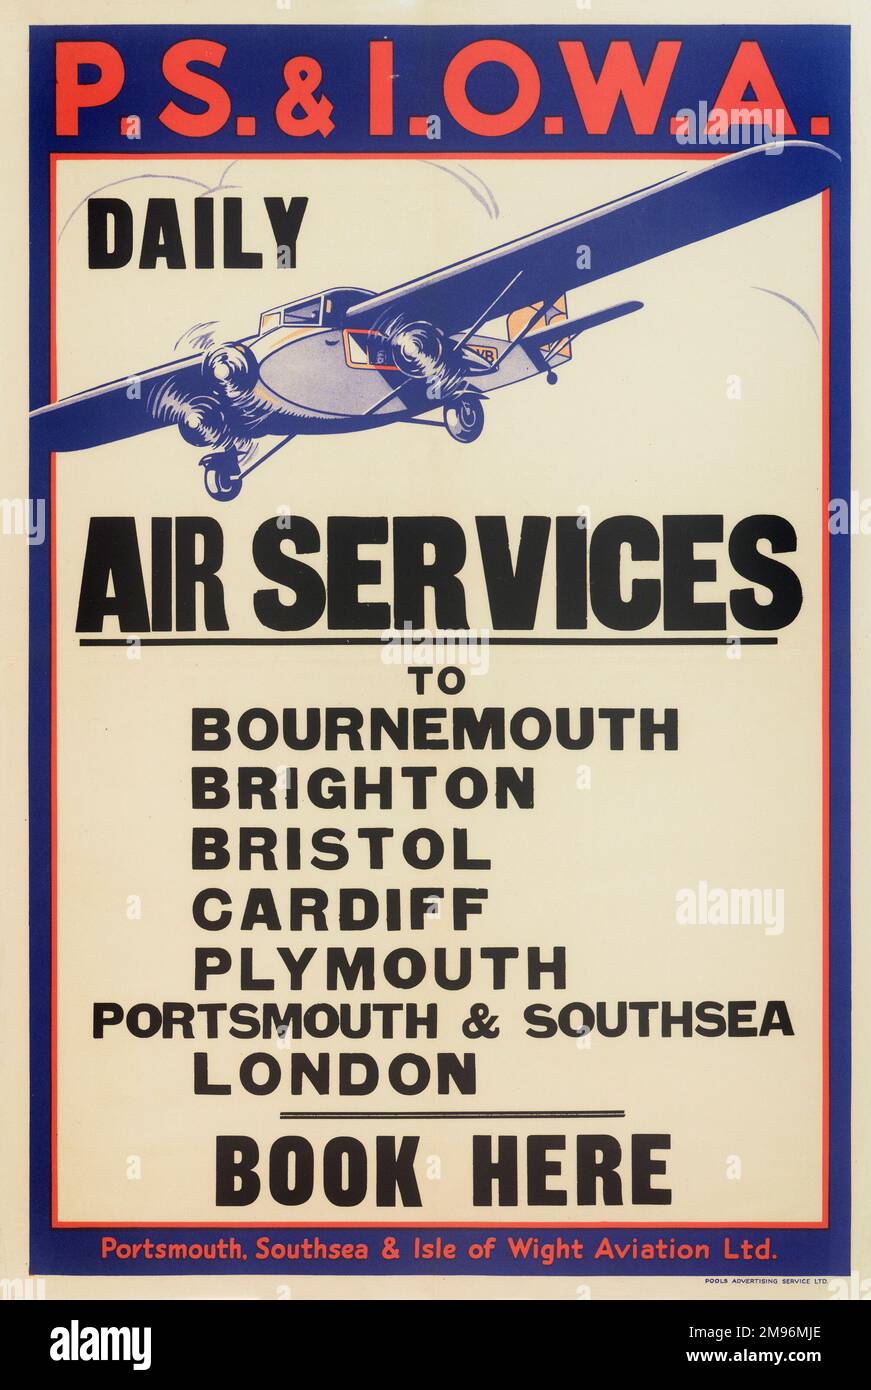 Poster, Portsmouth, Southsea & Isle of Wight Aviation Ltd (PS & IOWA), Daily Air Services nach Bournemouth, Brighton, Bristol, Cardiff, Plymouth, Portsmouth & Southsea, London. Buchen Sie Hier. Stockfoto